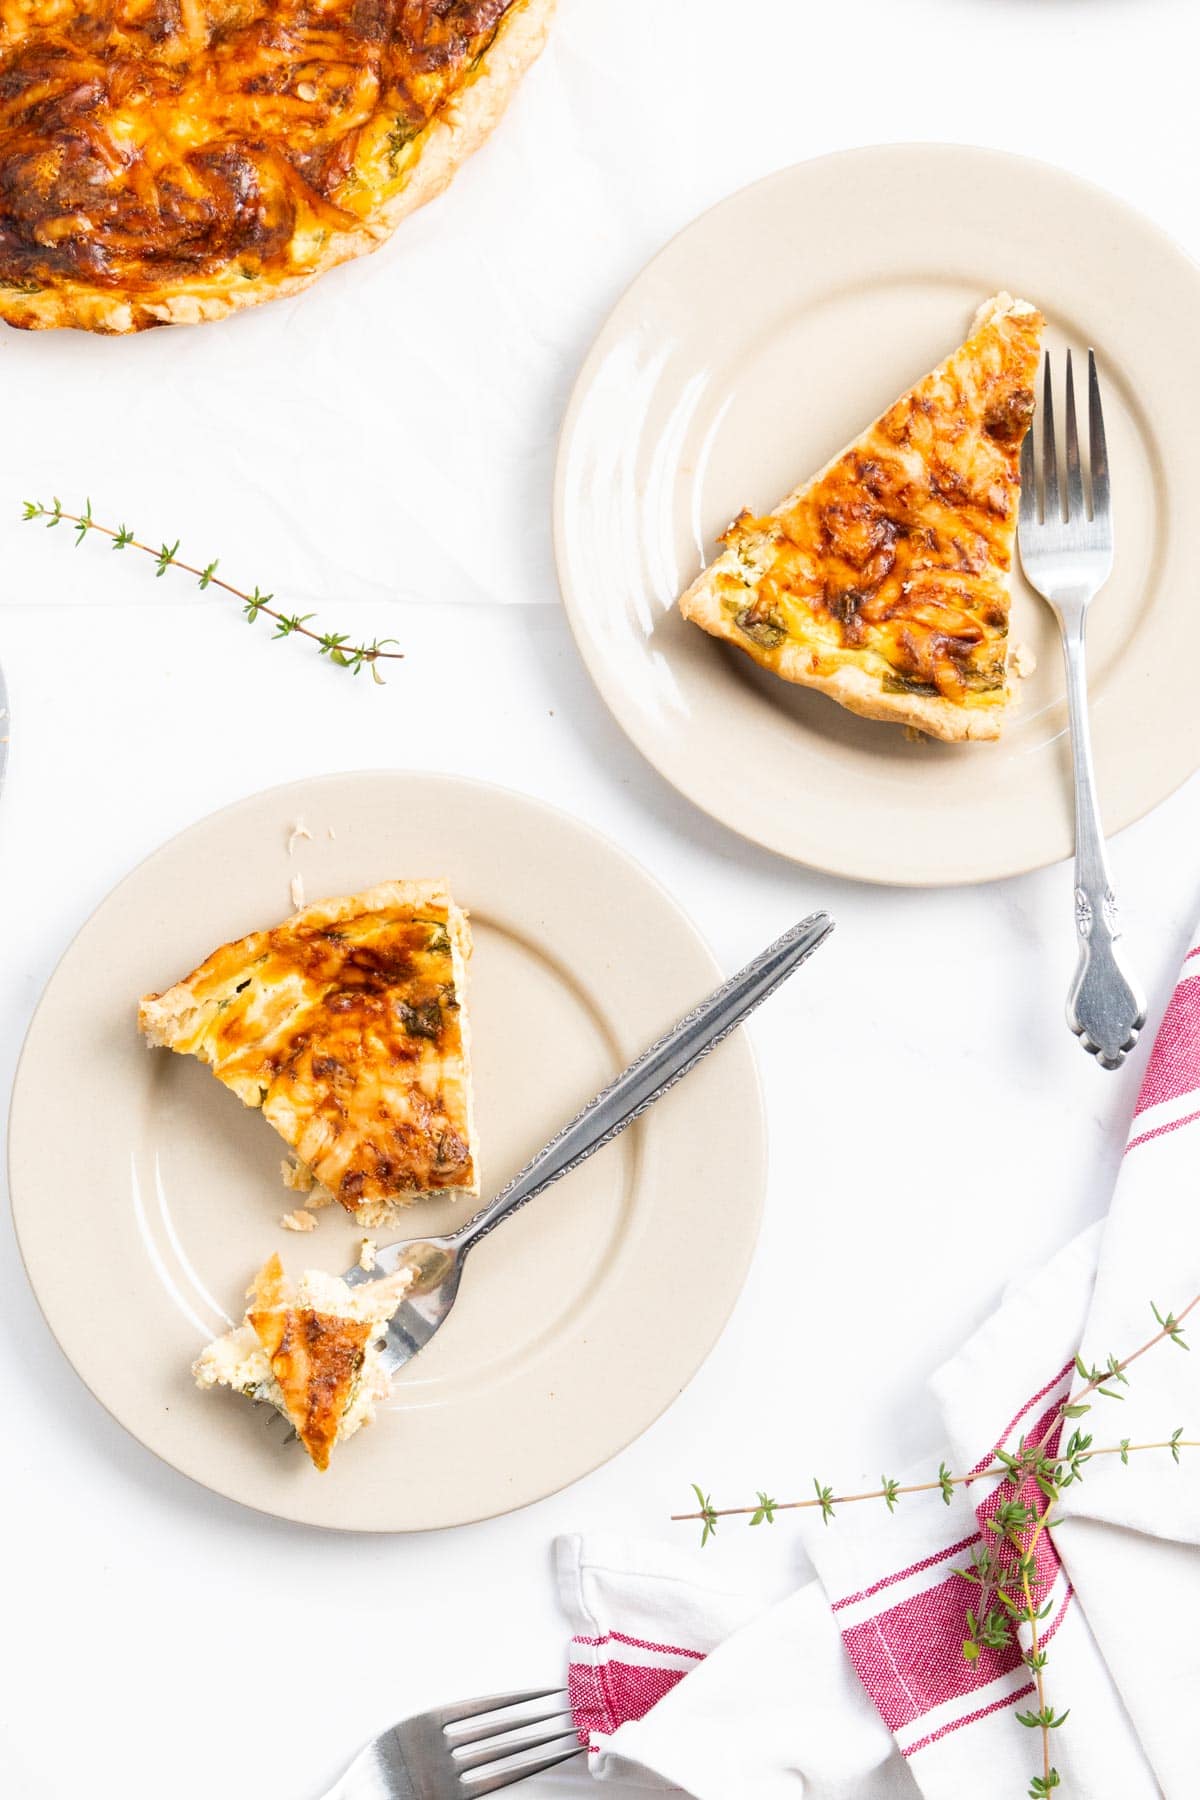 2 beige plate with a slice of quiche in it, one has a bite taken with a fork.